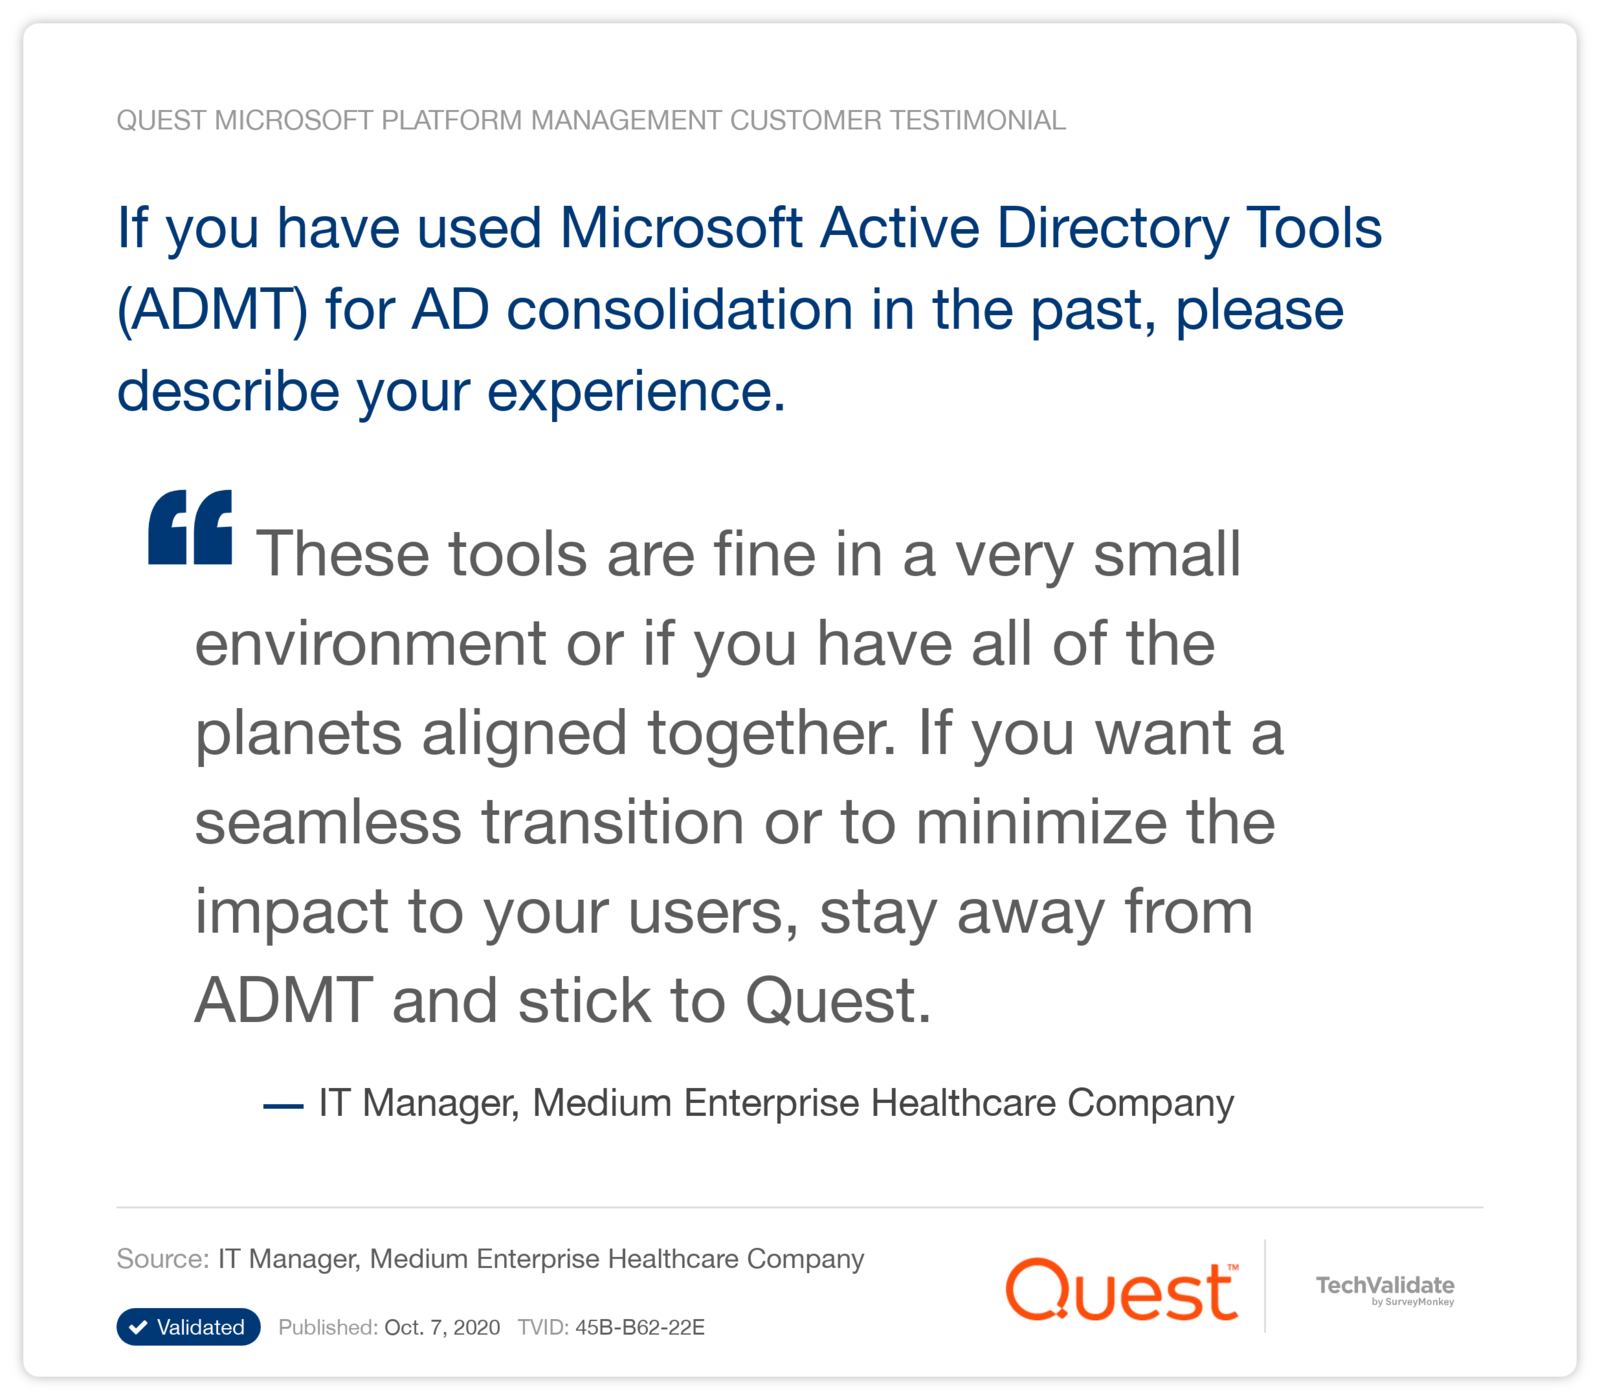 If you have used Microsoft Active Directory Tools (ADMT) for AD consolidation in the past, please describe your experience.